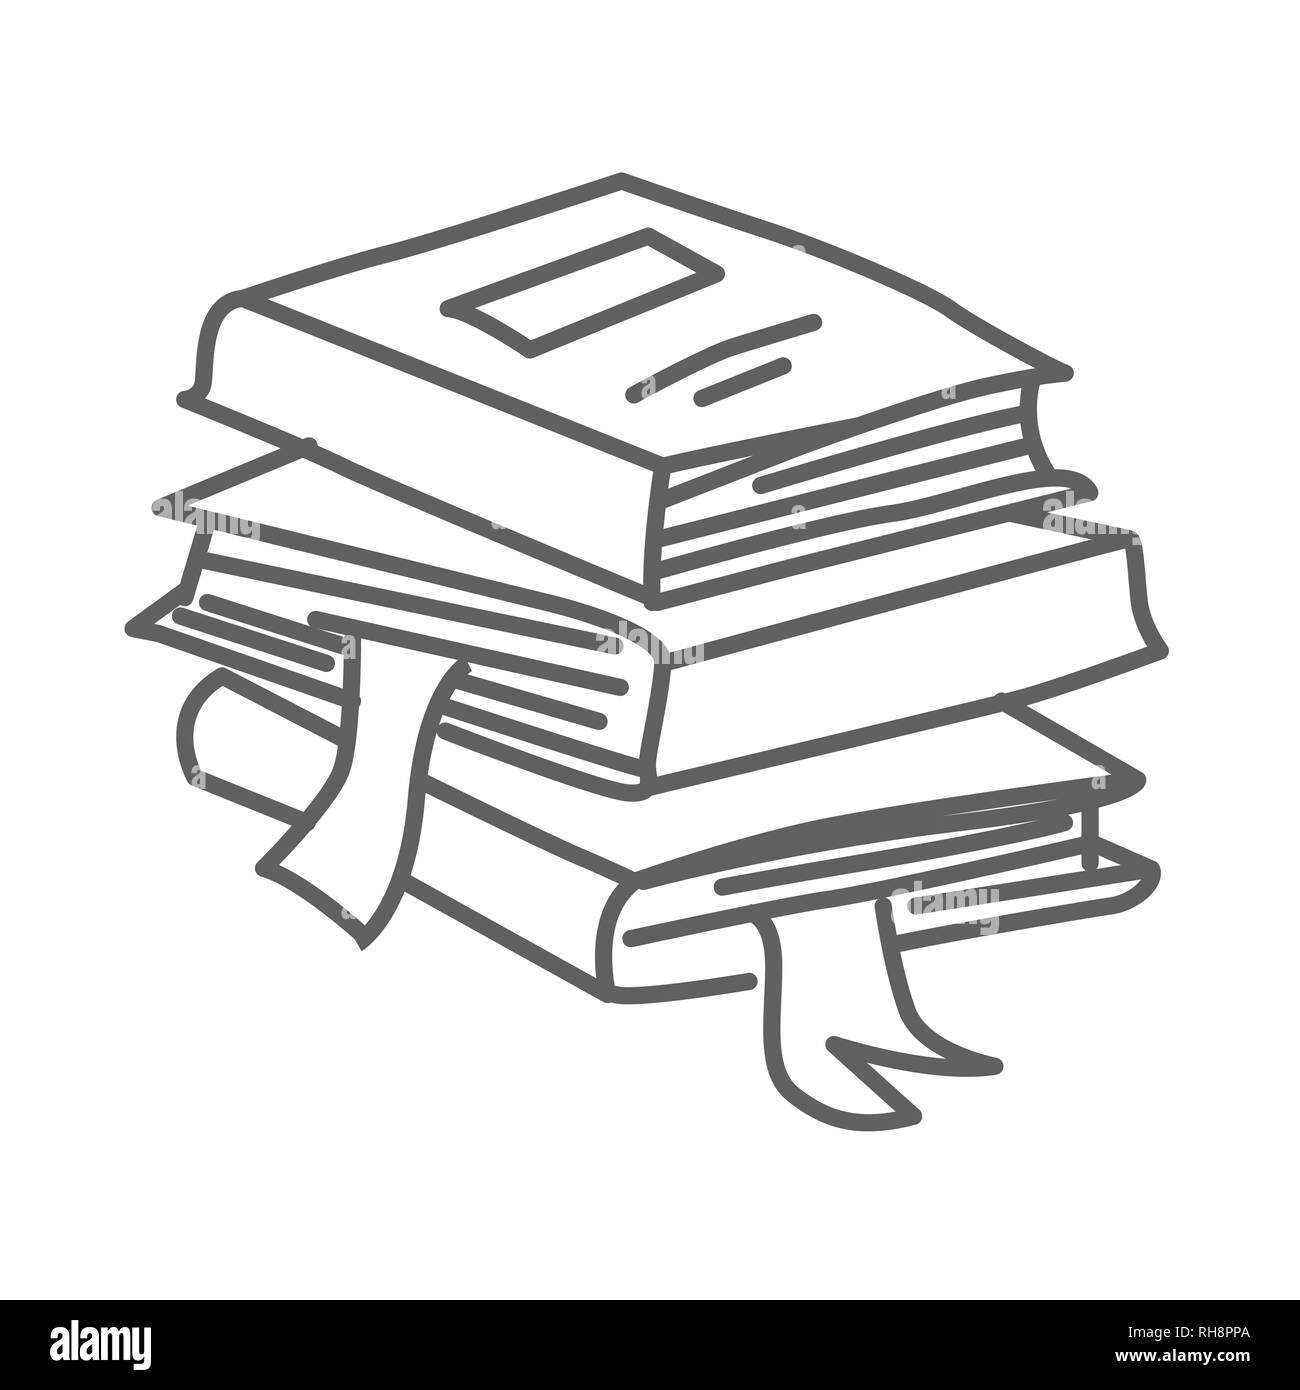 https://c8.alamy.com/comp/RH8PPA/stack-pile-of-books-vector-doodle-icon-isolated-on-white-hand-drawn-sketchy-style-RH8PPA.jpg